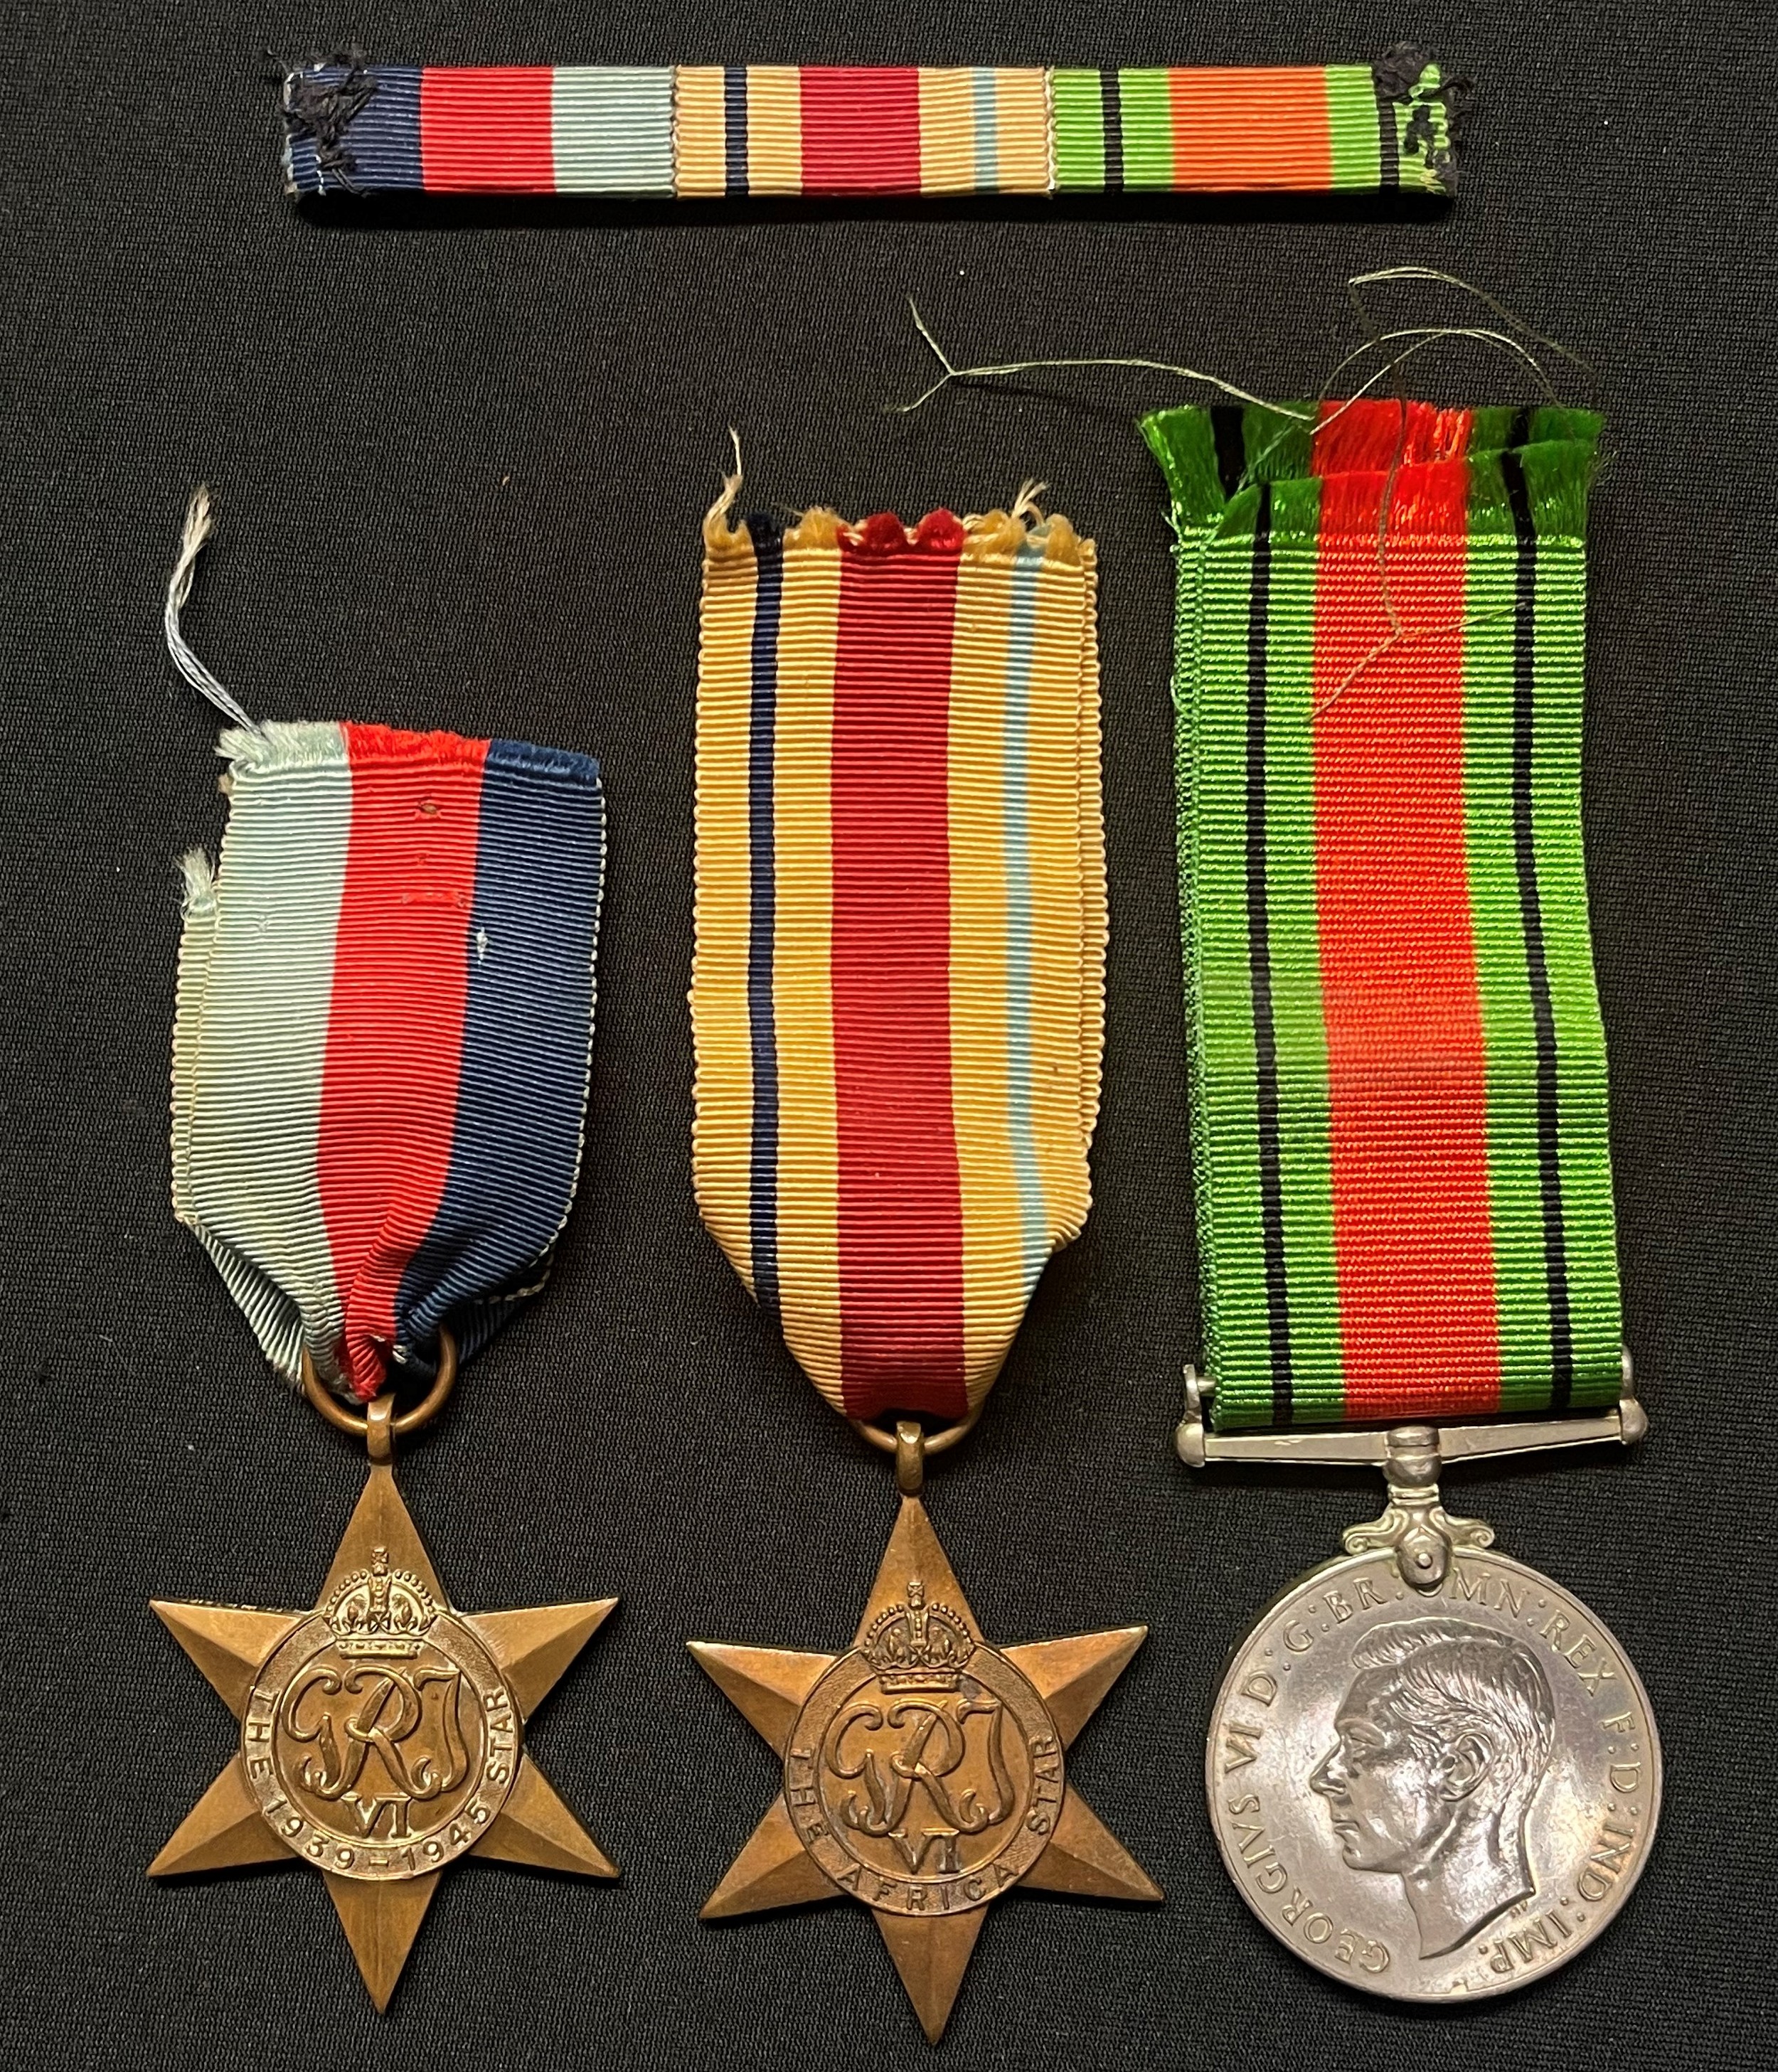 WW2 British Medal Group comprising of 1939-45 Star, Africa Star and Defence Medal. Complete with